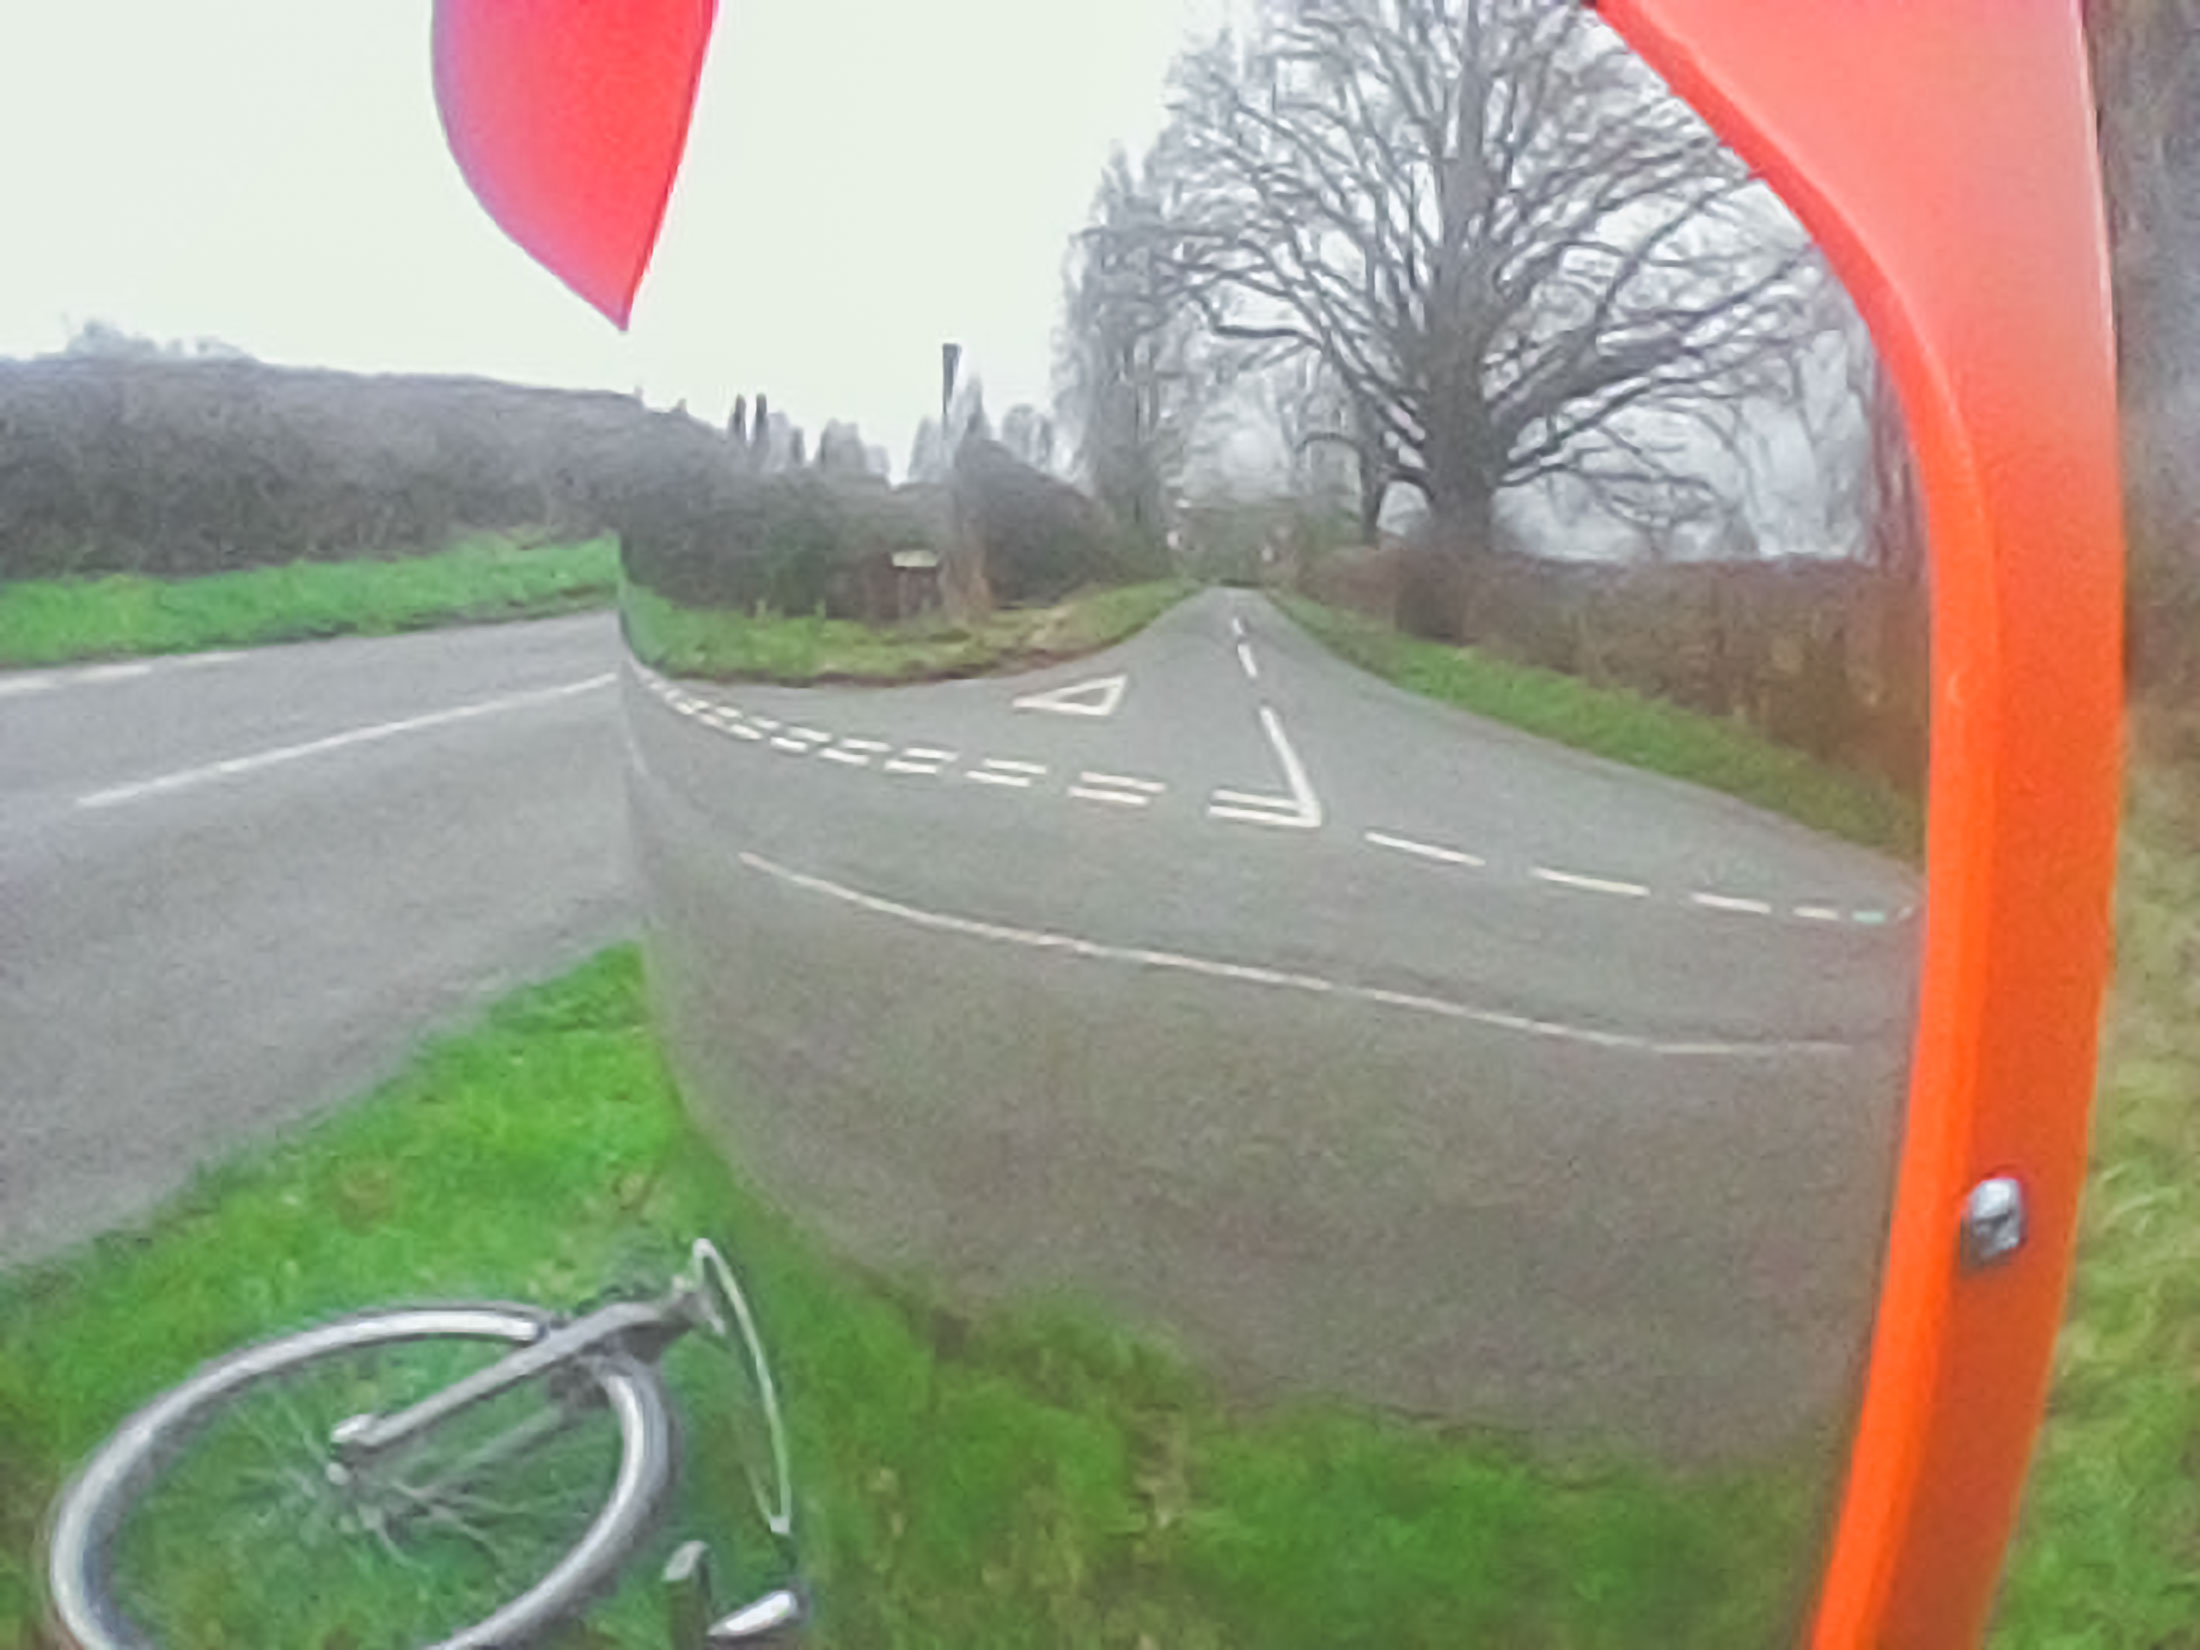 Shows a country road to the left, then the 180 degrees mirror with orange outside border, that is domed on the front, that then shows the road opposite that morphs the real road, and the reflection in the mirror.